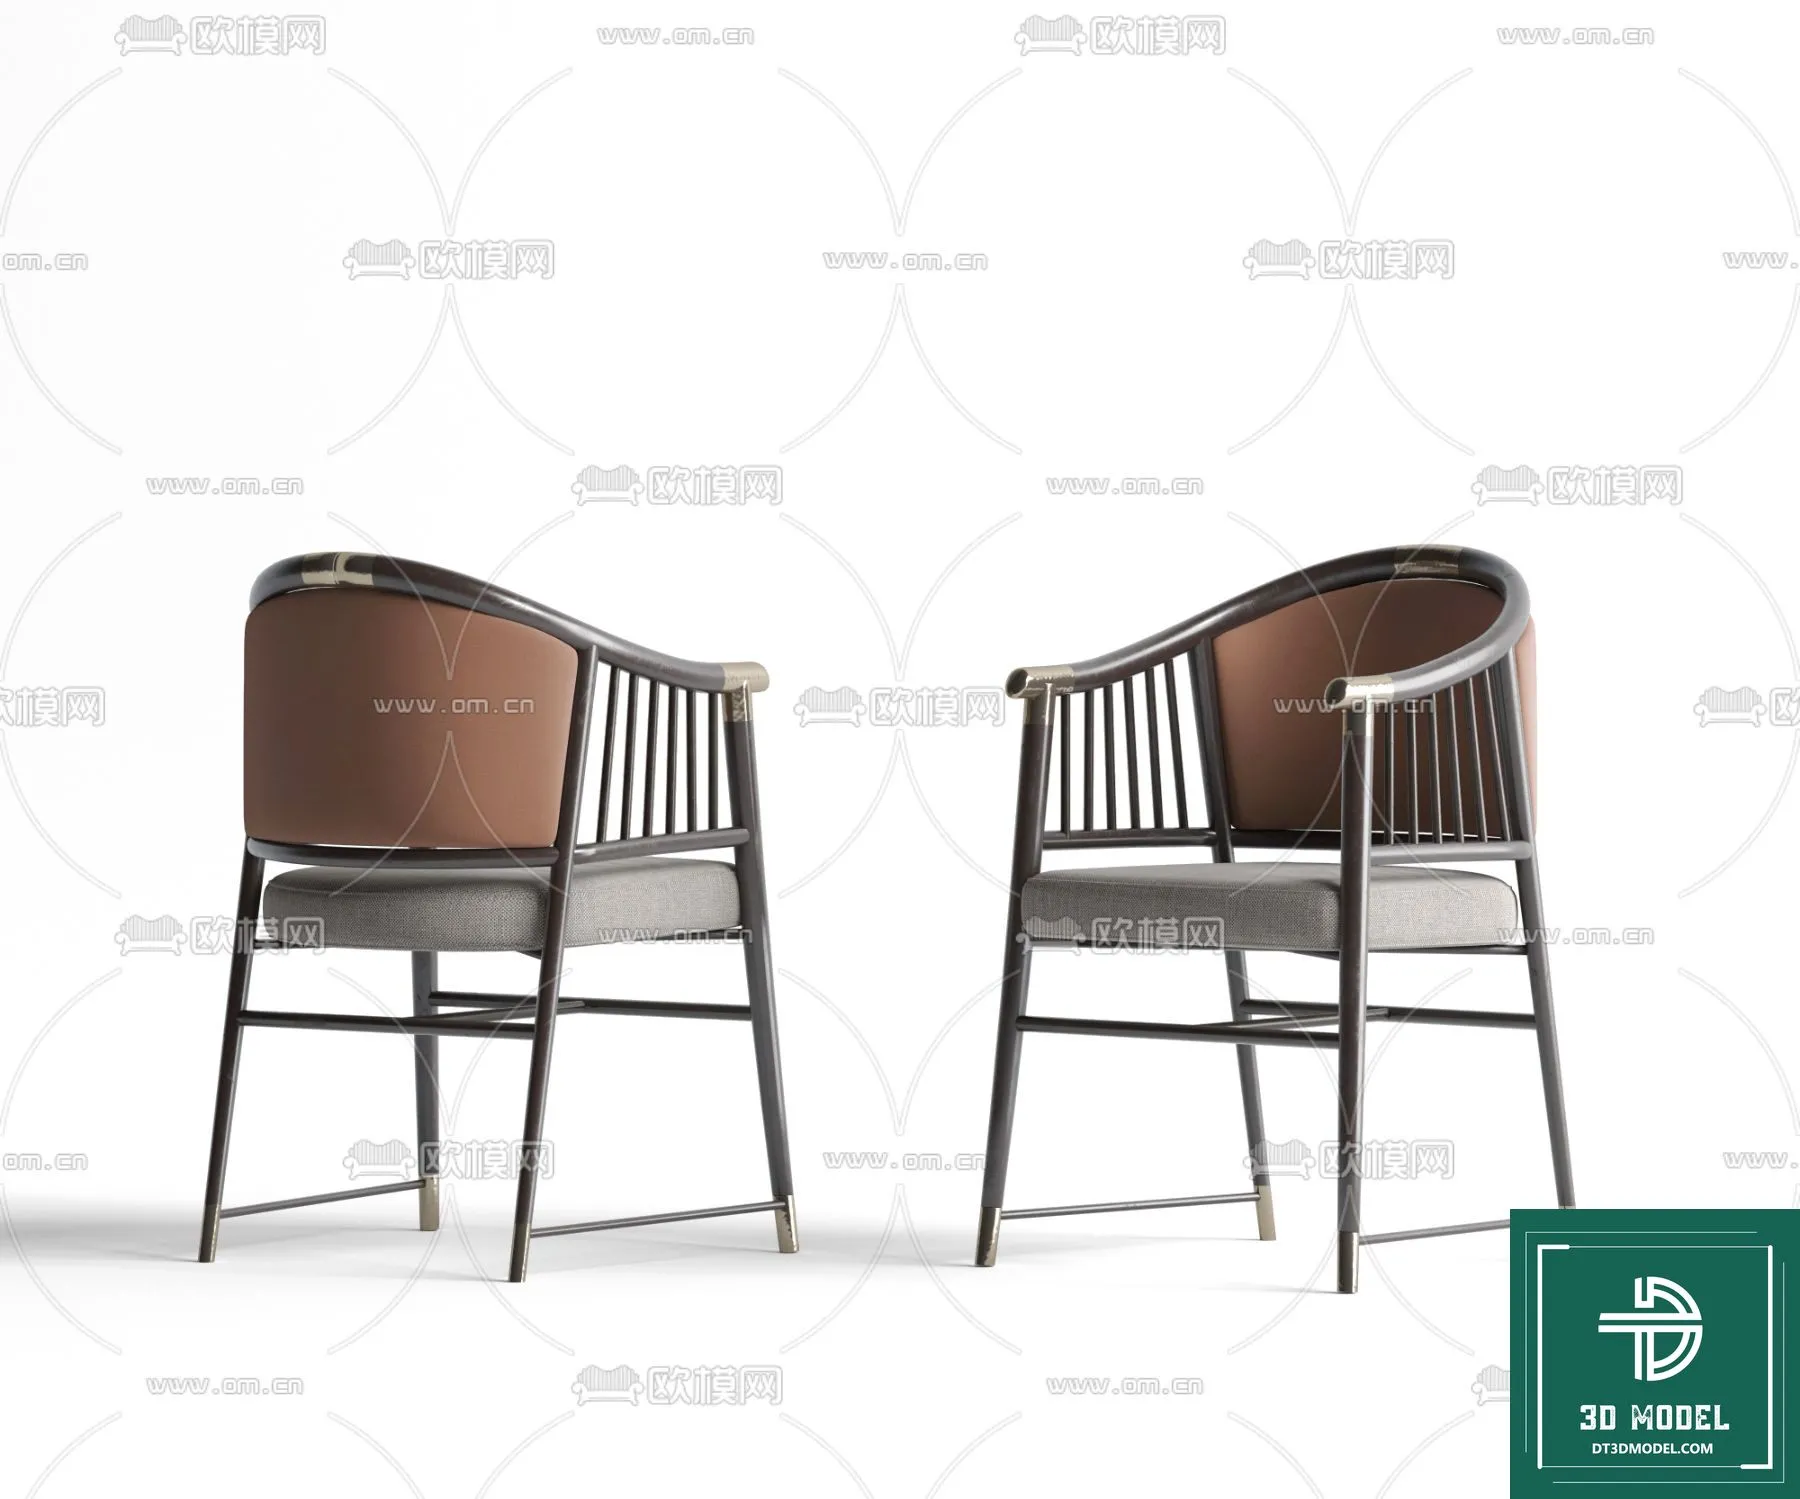 INDOCHINE STYLE – 3D MODELS – 401